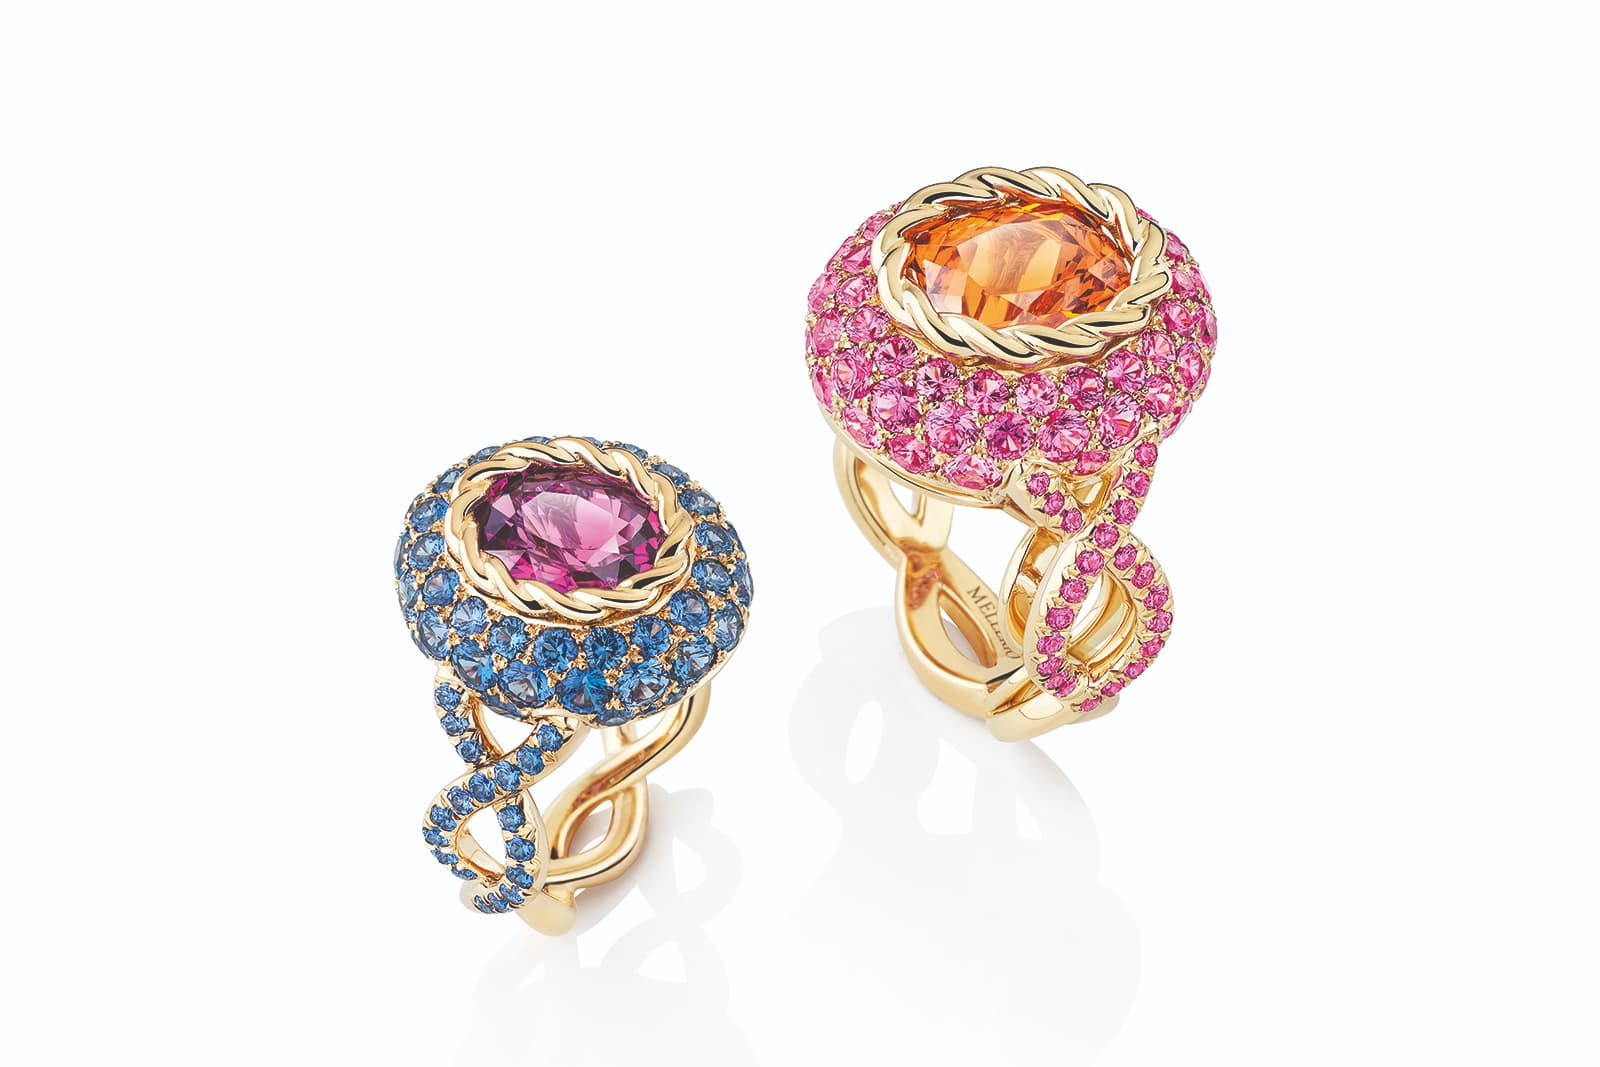 Two colourful rings from MELLERIO's new Color Queen collection, set with a central purple sapphire and spessartite garnet